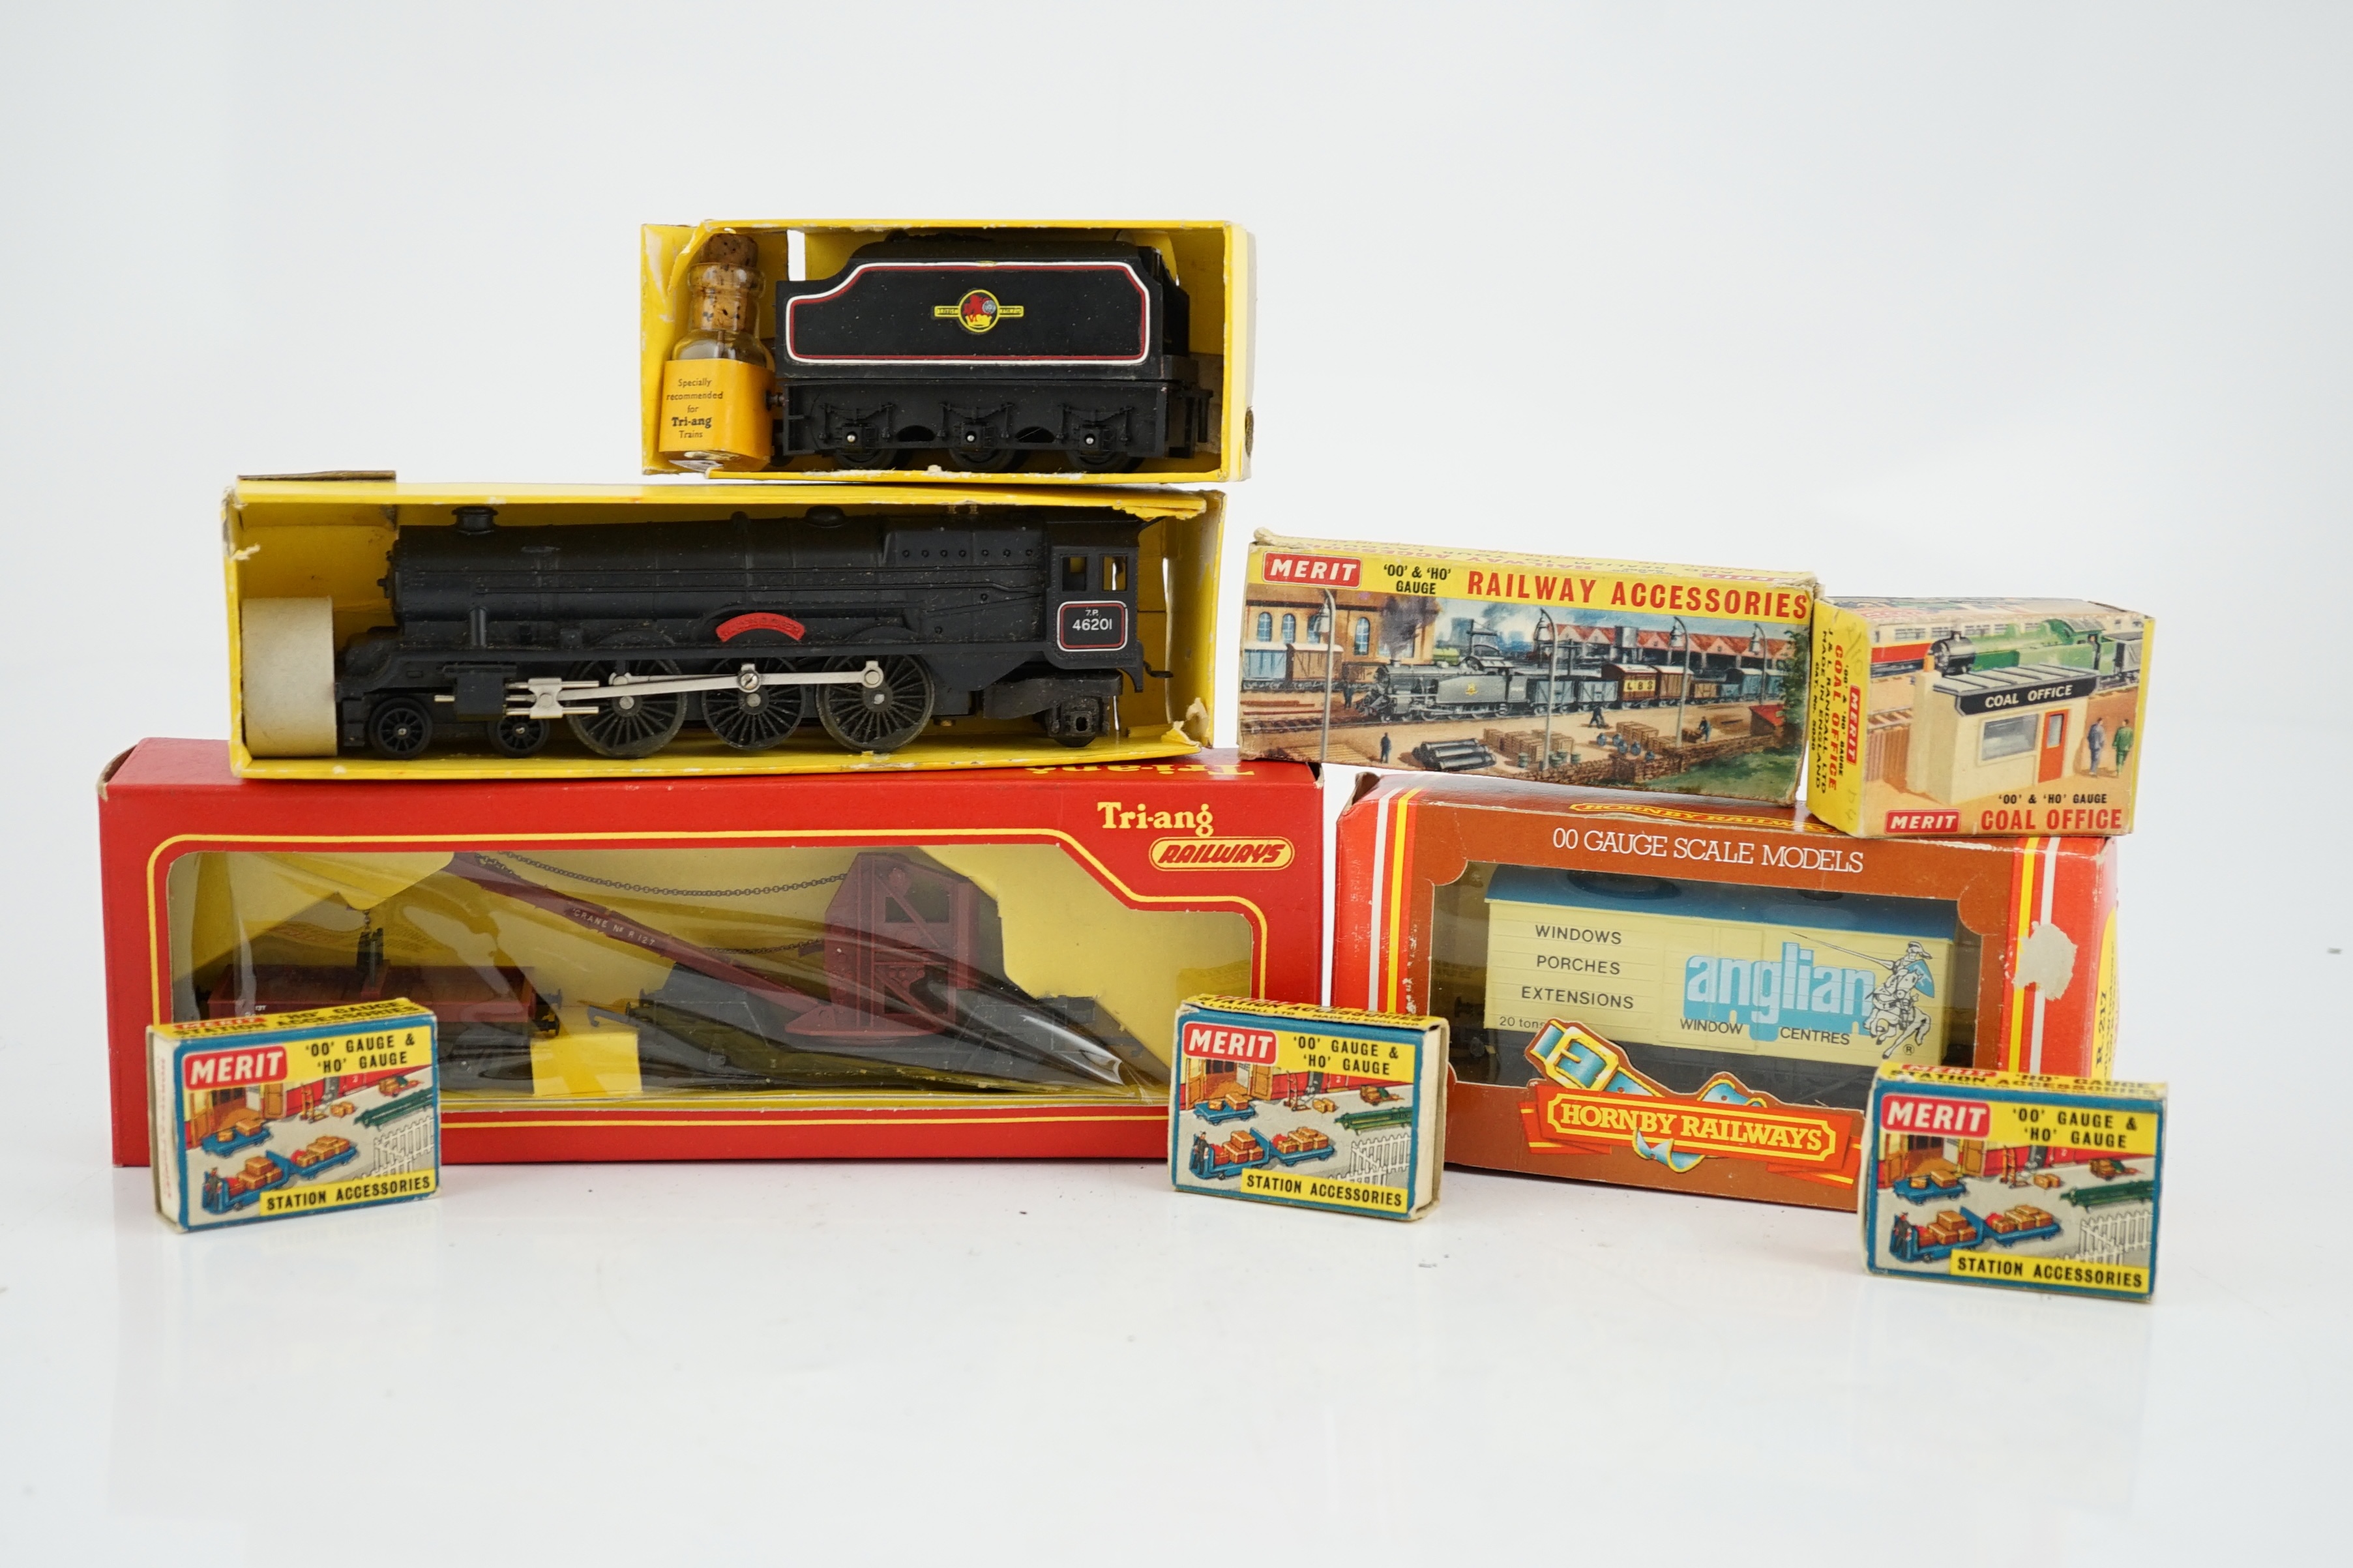 A collection of mostly Tri-ang Railways 00 gauge model railway, including three locomotives; a BR saddle tank loco (R153), a BR Princess Royal class 4-6-0 and an S.R. Suburban Motor Coach driving unit